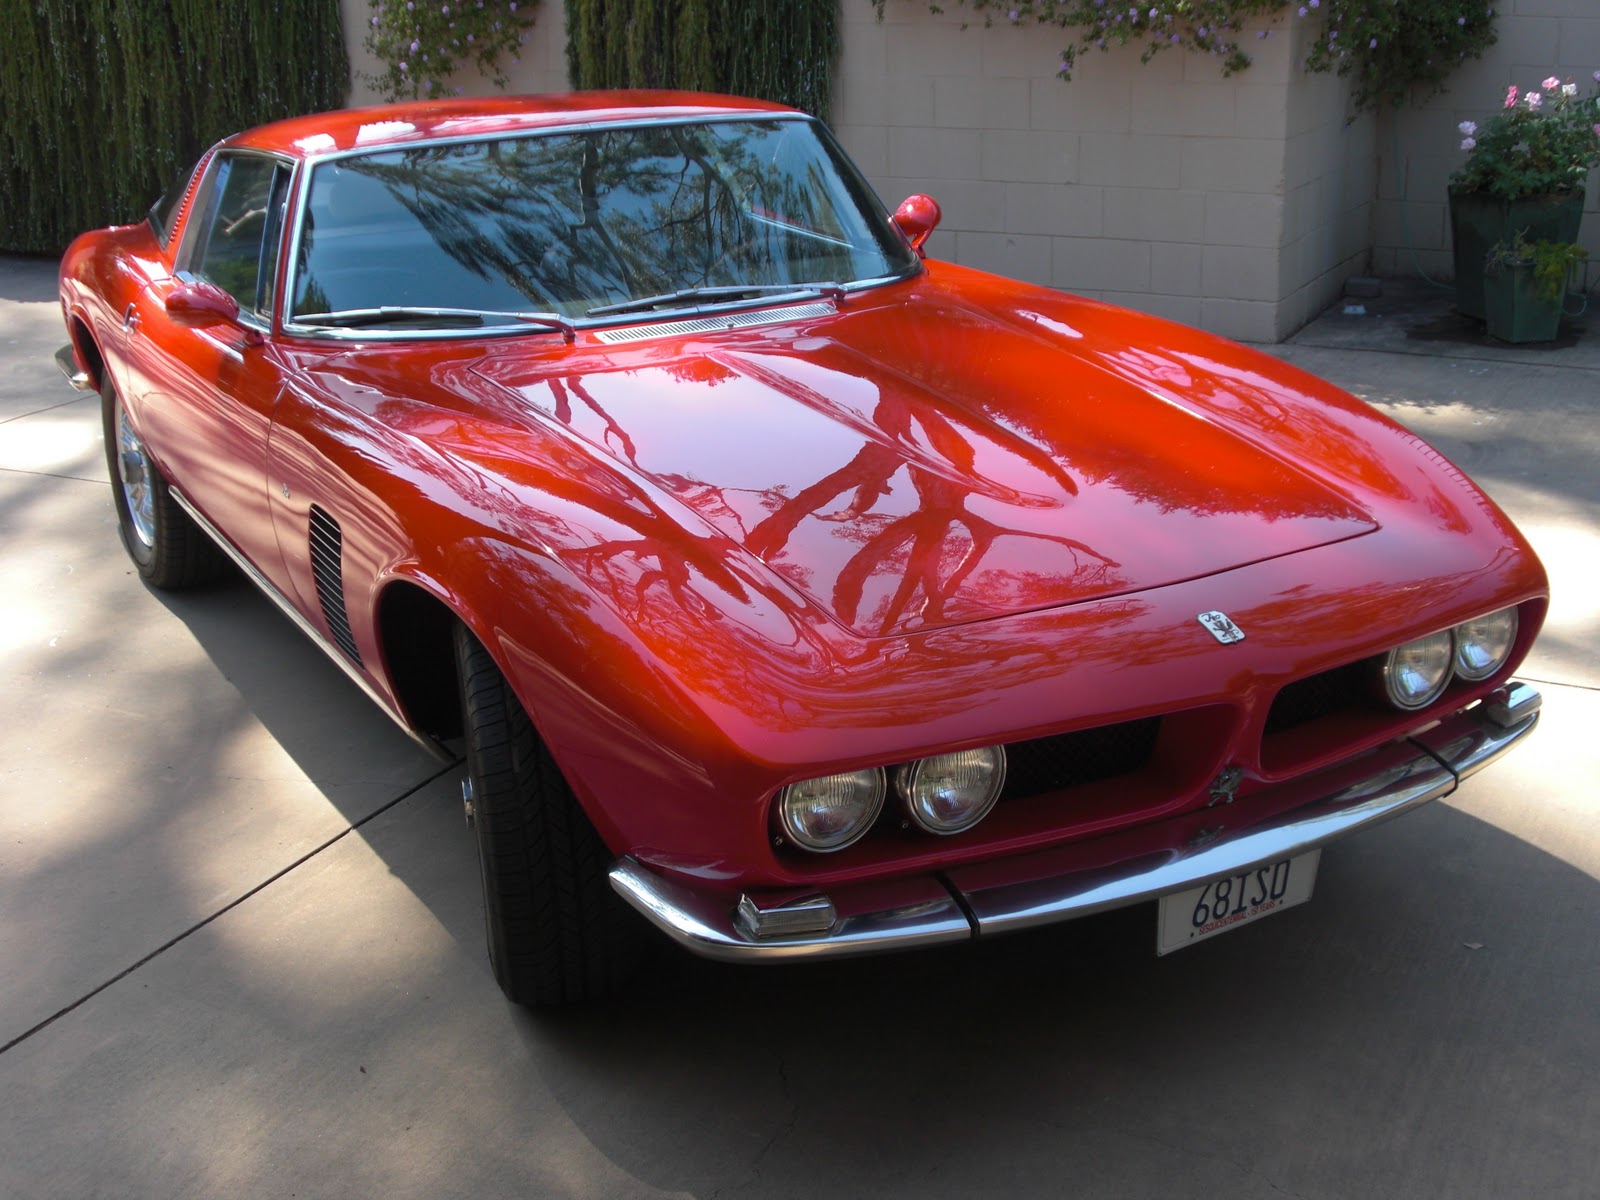 The Iso Grifo – A Design Analysis